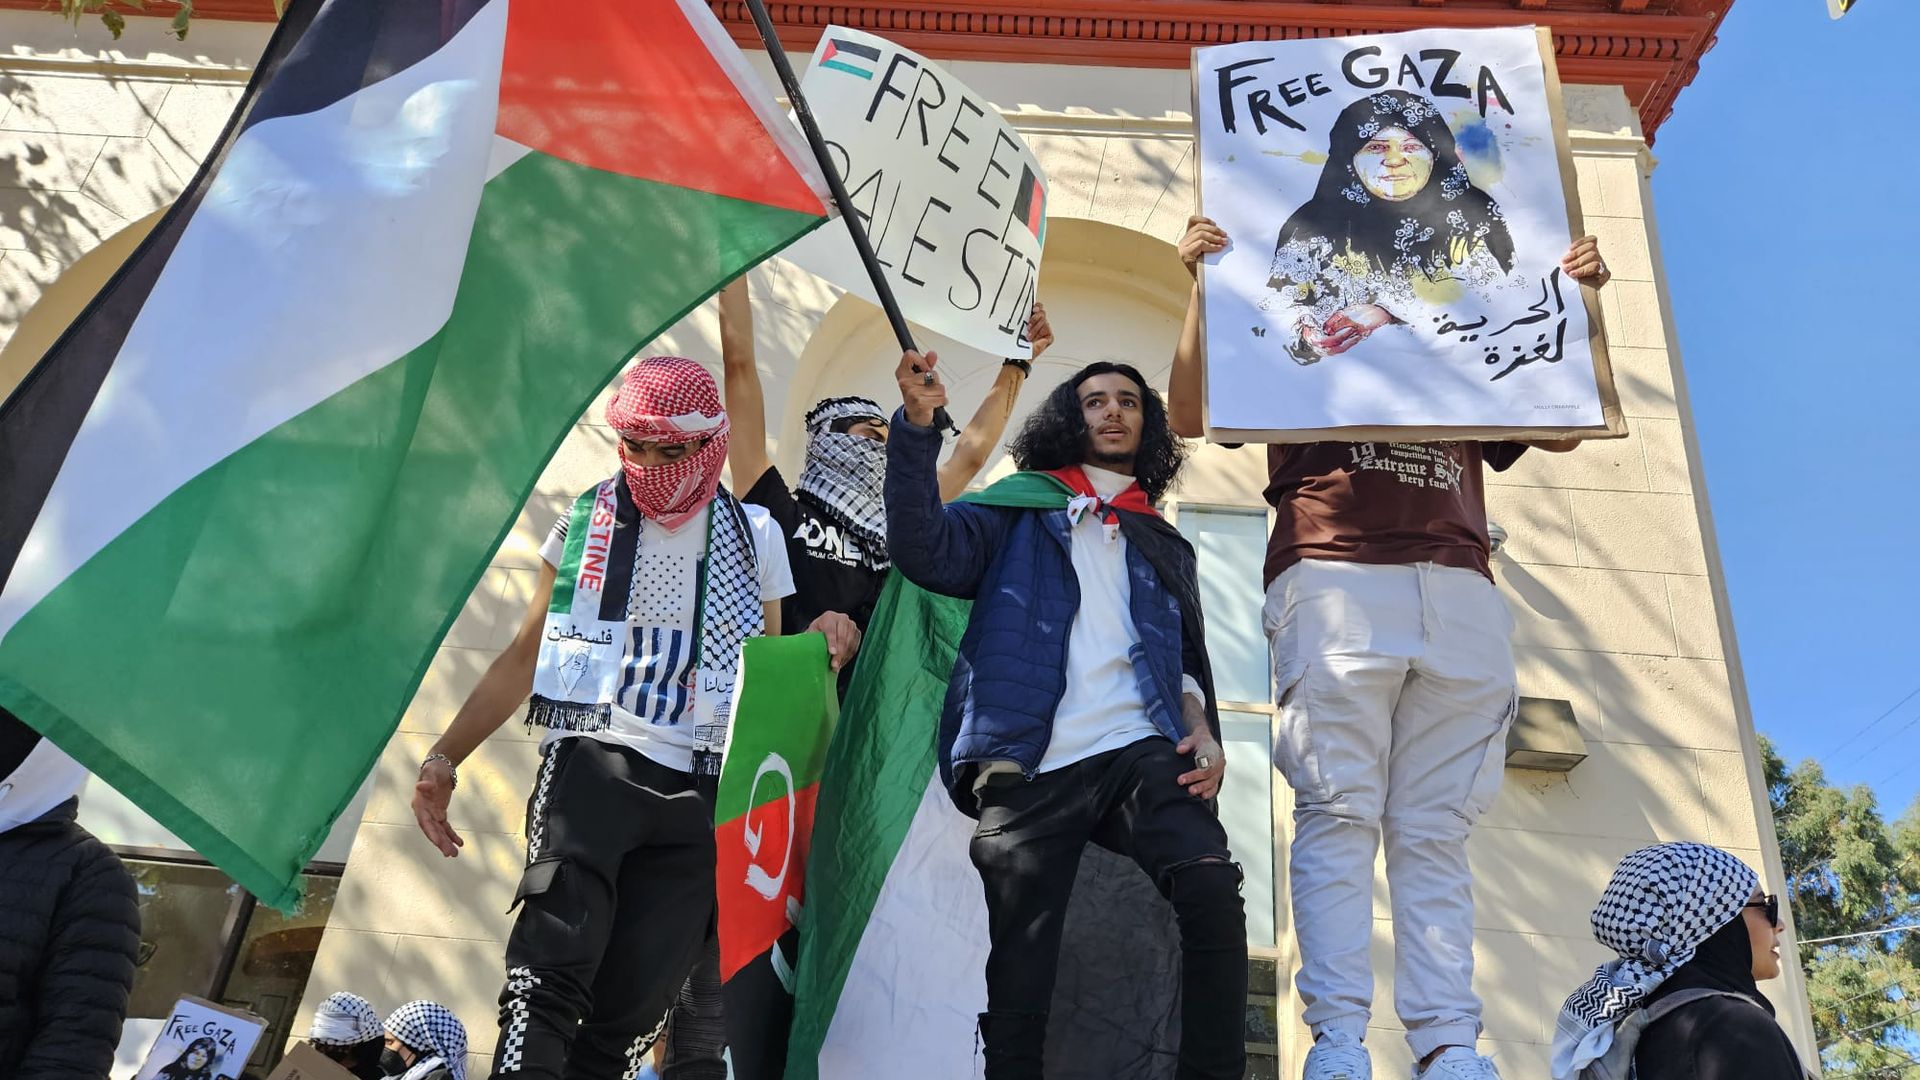 High school students stand on a platform raising the Palestinian flag and "Free Gaza" signs